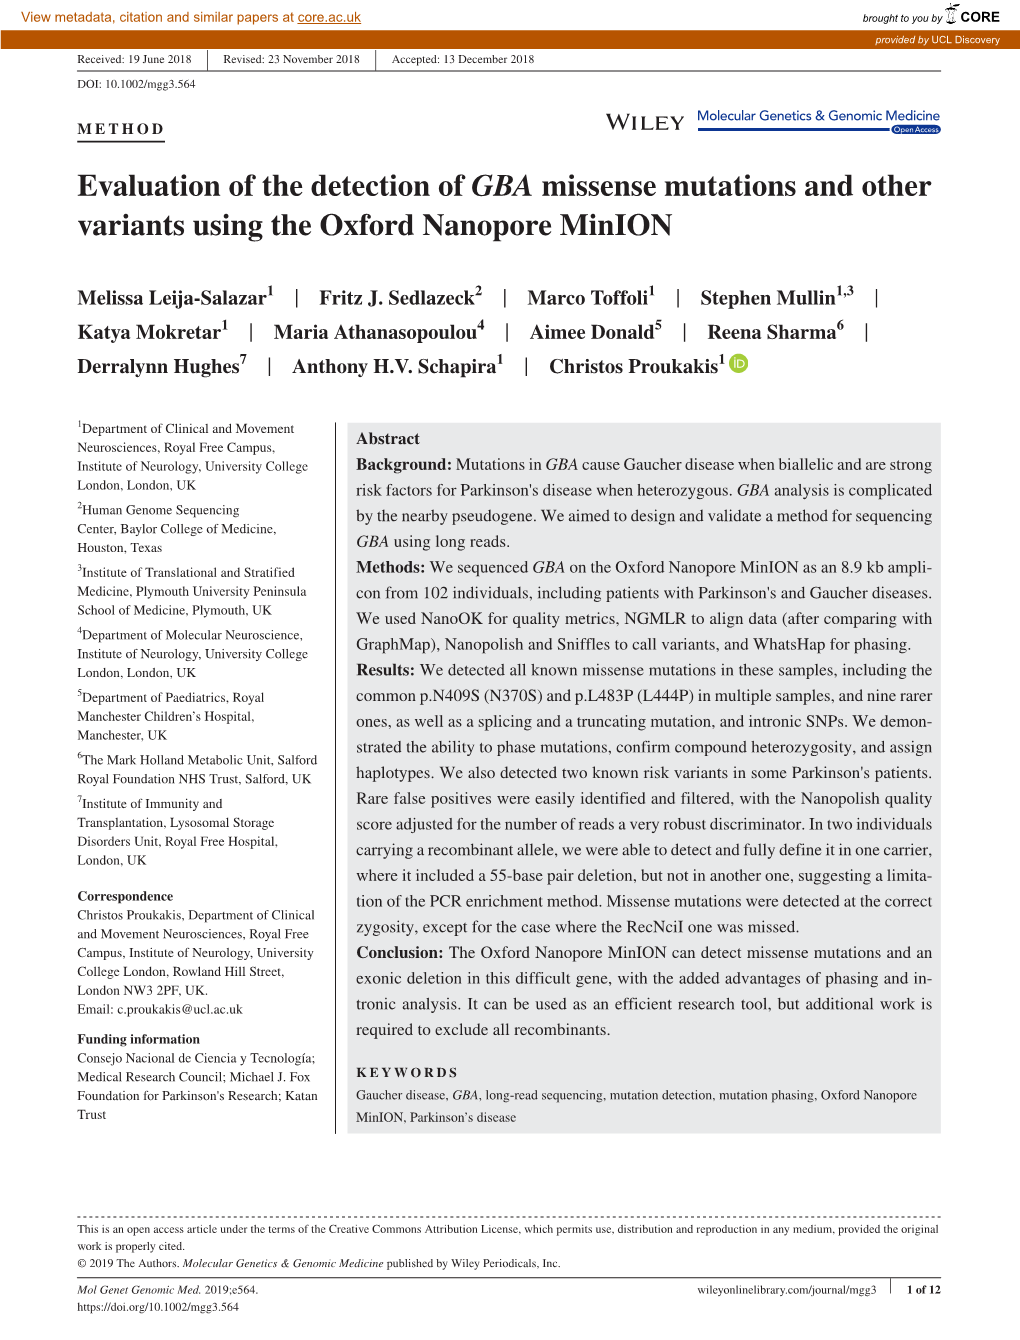 Evaluation of the Detection of GBA Missense Mutations and Other Variants Using the Oxford Nanopore Minion